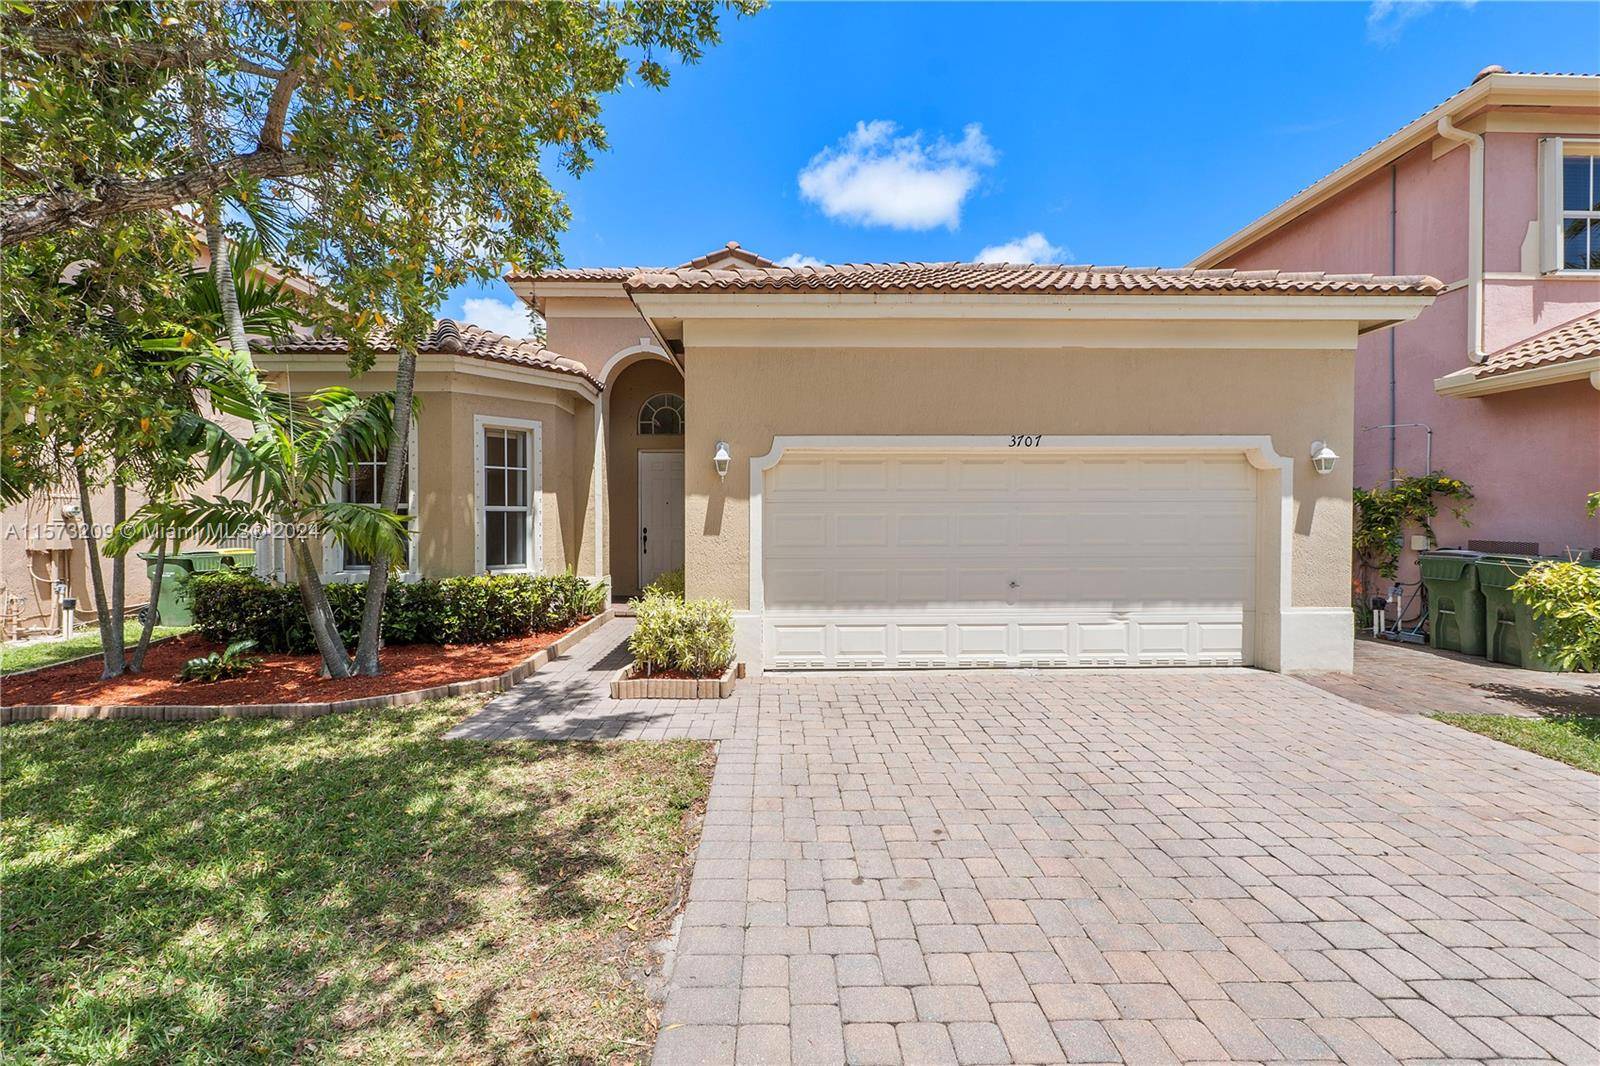 Nestled within the Waterstone Gated community, this spacious 5 bedroom, 3 bathroom home invites you with soaring high ceilings to unwind with tranquil water views of the lake from your ...